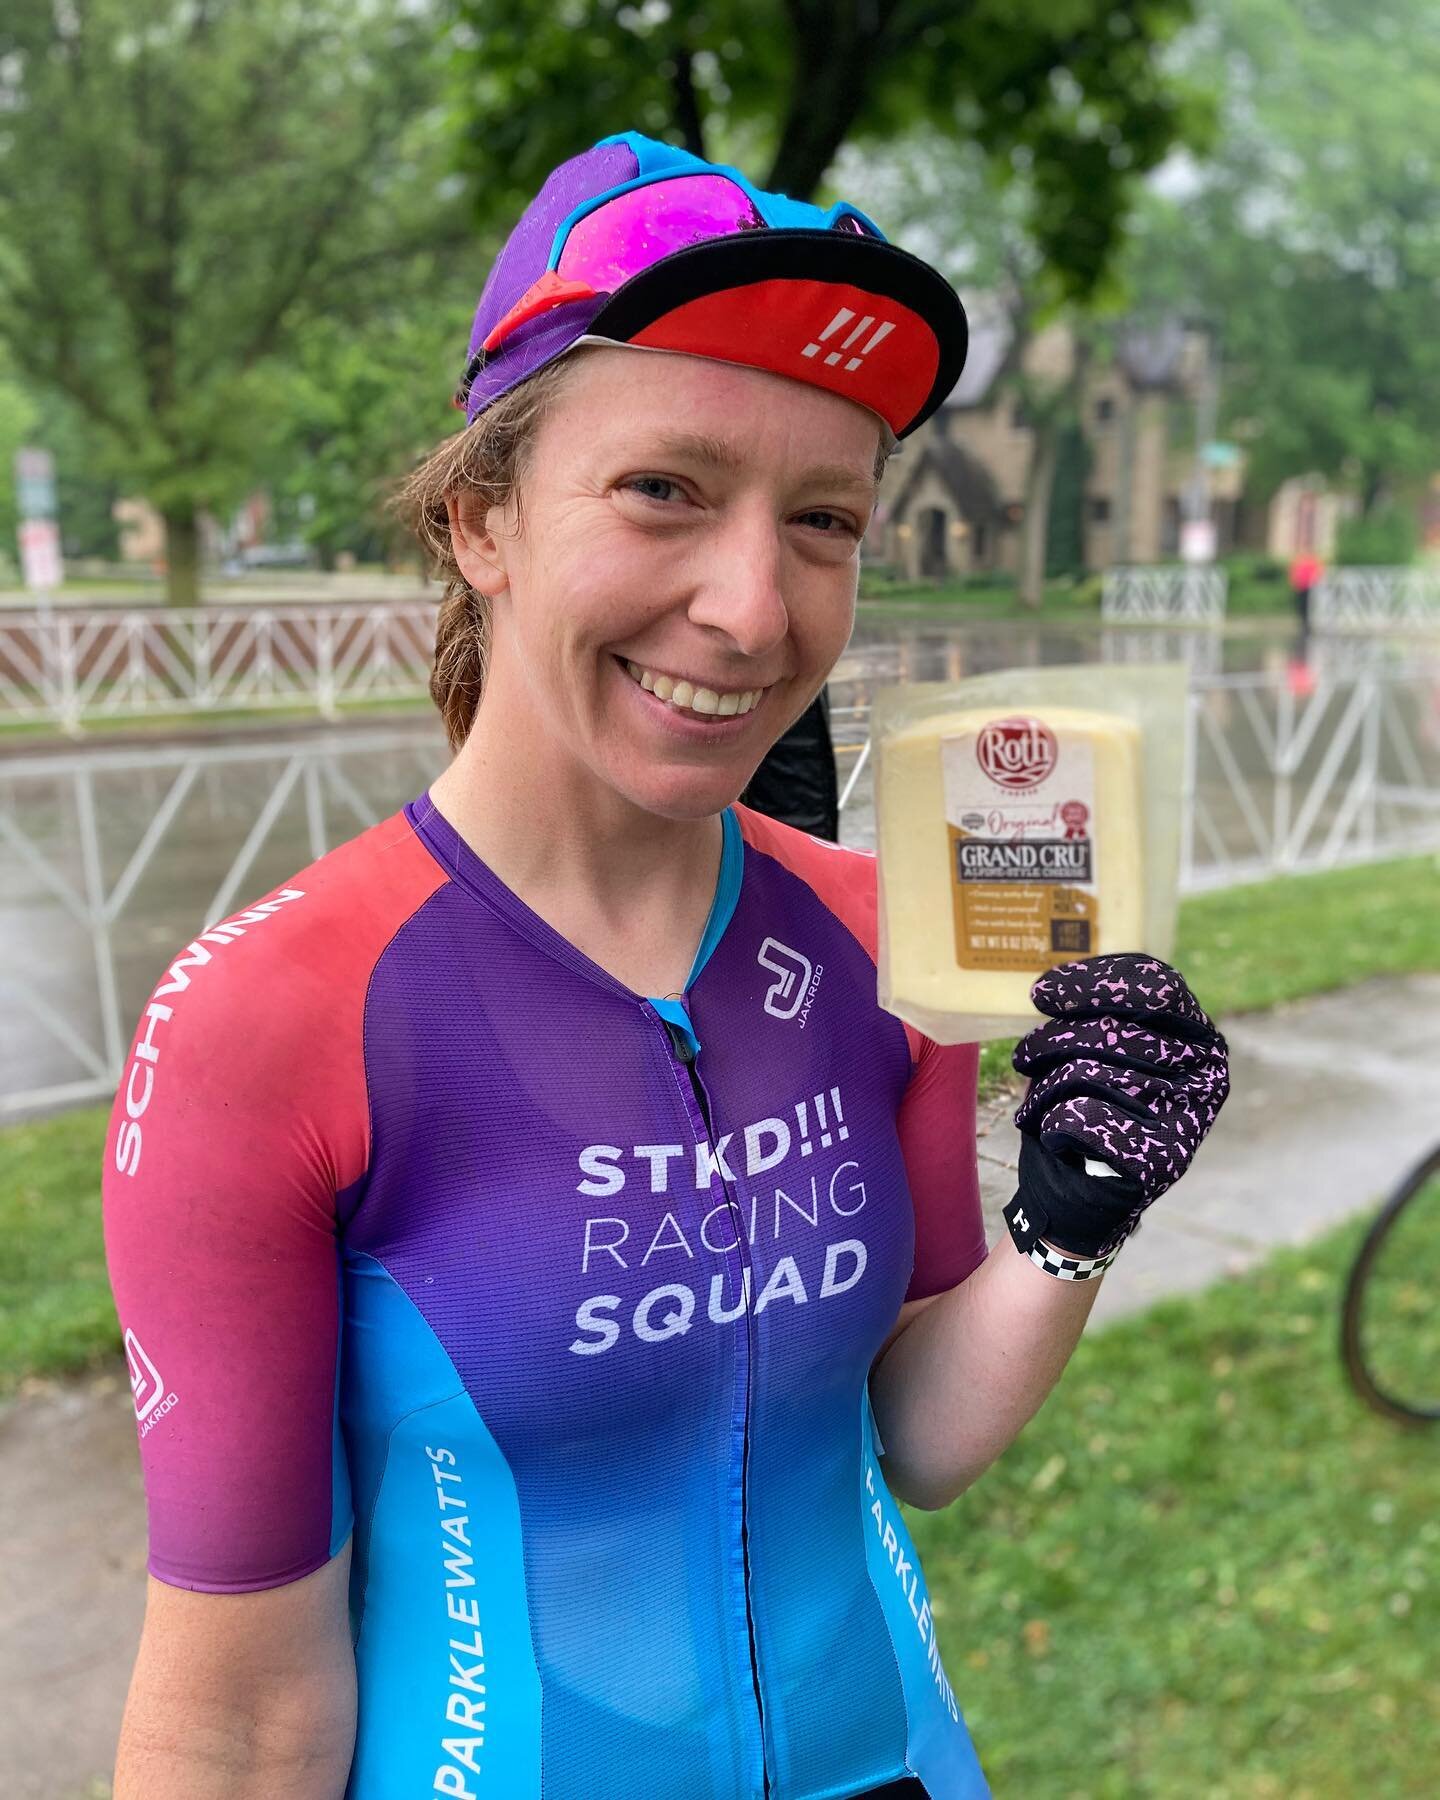 On this [cheesy] rainy day on Downers Ave, Hannah put all the pieces together and finally landed her first Cat 3 podium!!!

It&rsquo;s been an honor watching her learn more and more everyday this series and her strong finish is so well deserved. 

Co